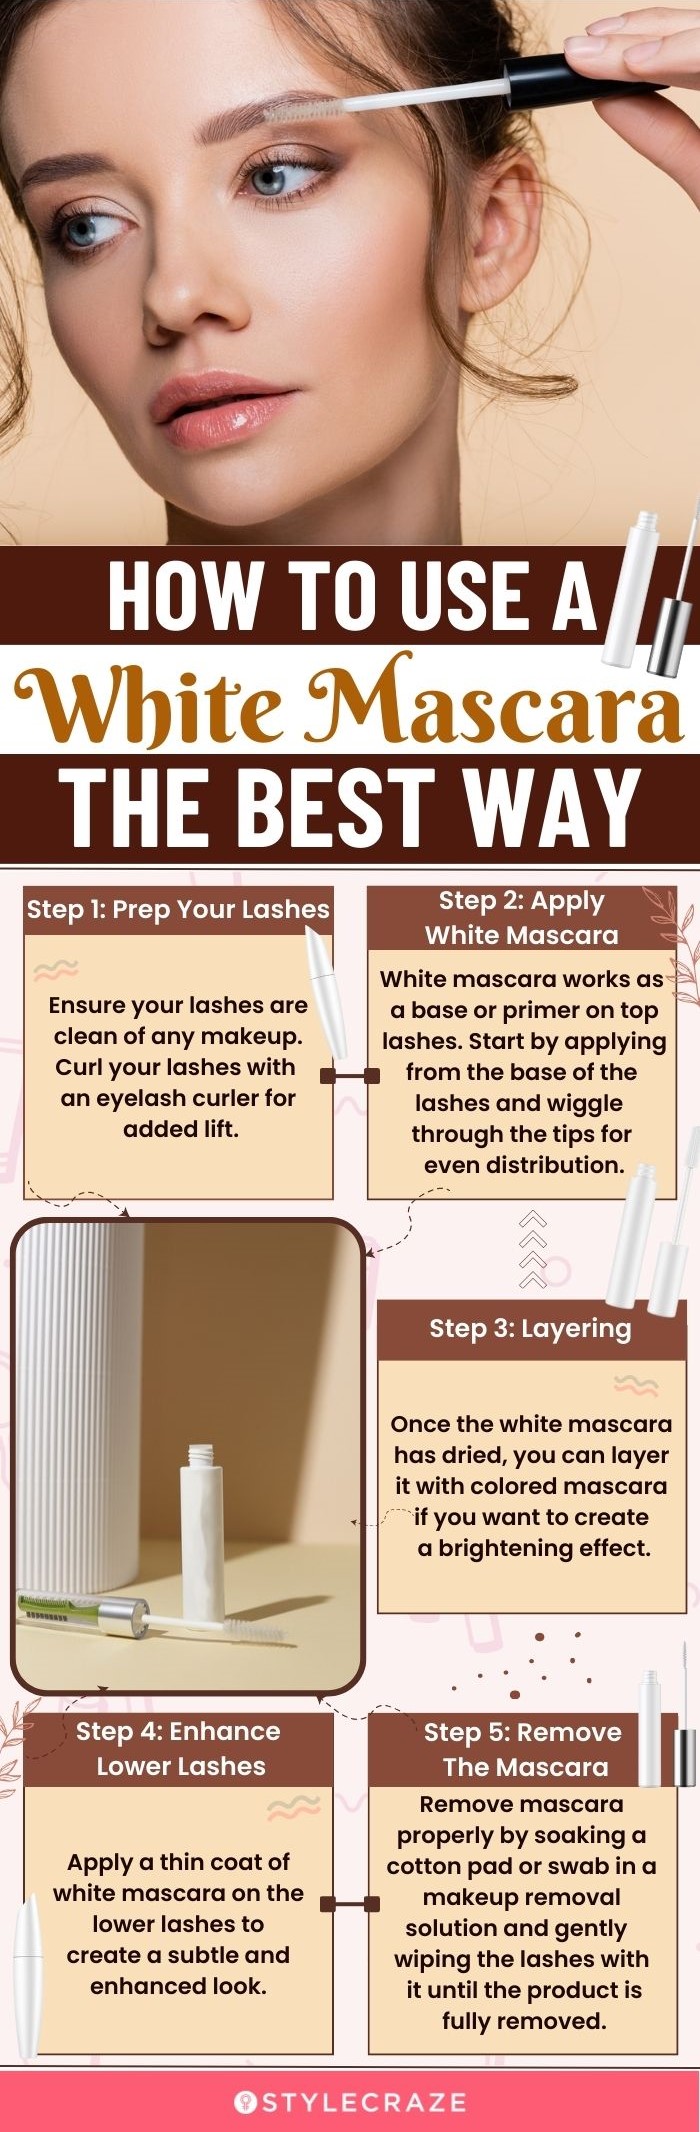 How To Use A White Mascara The Best Way (infographic)